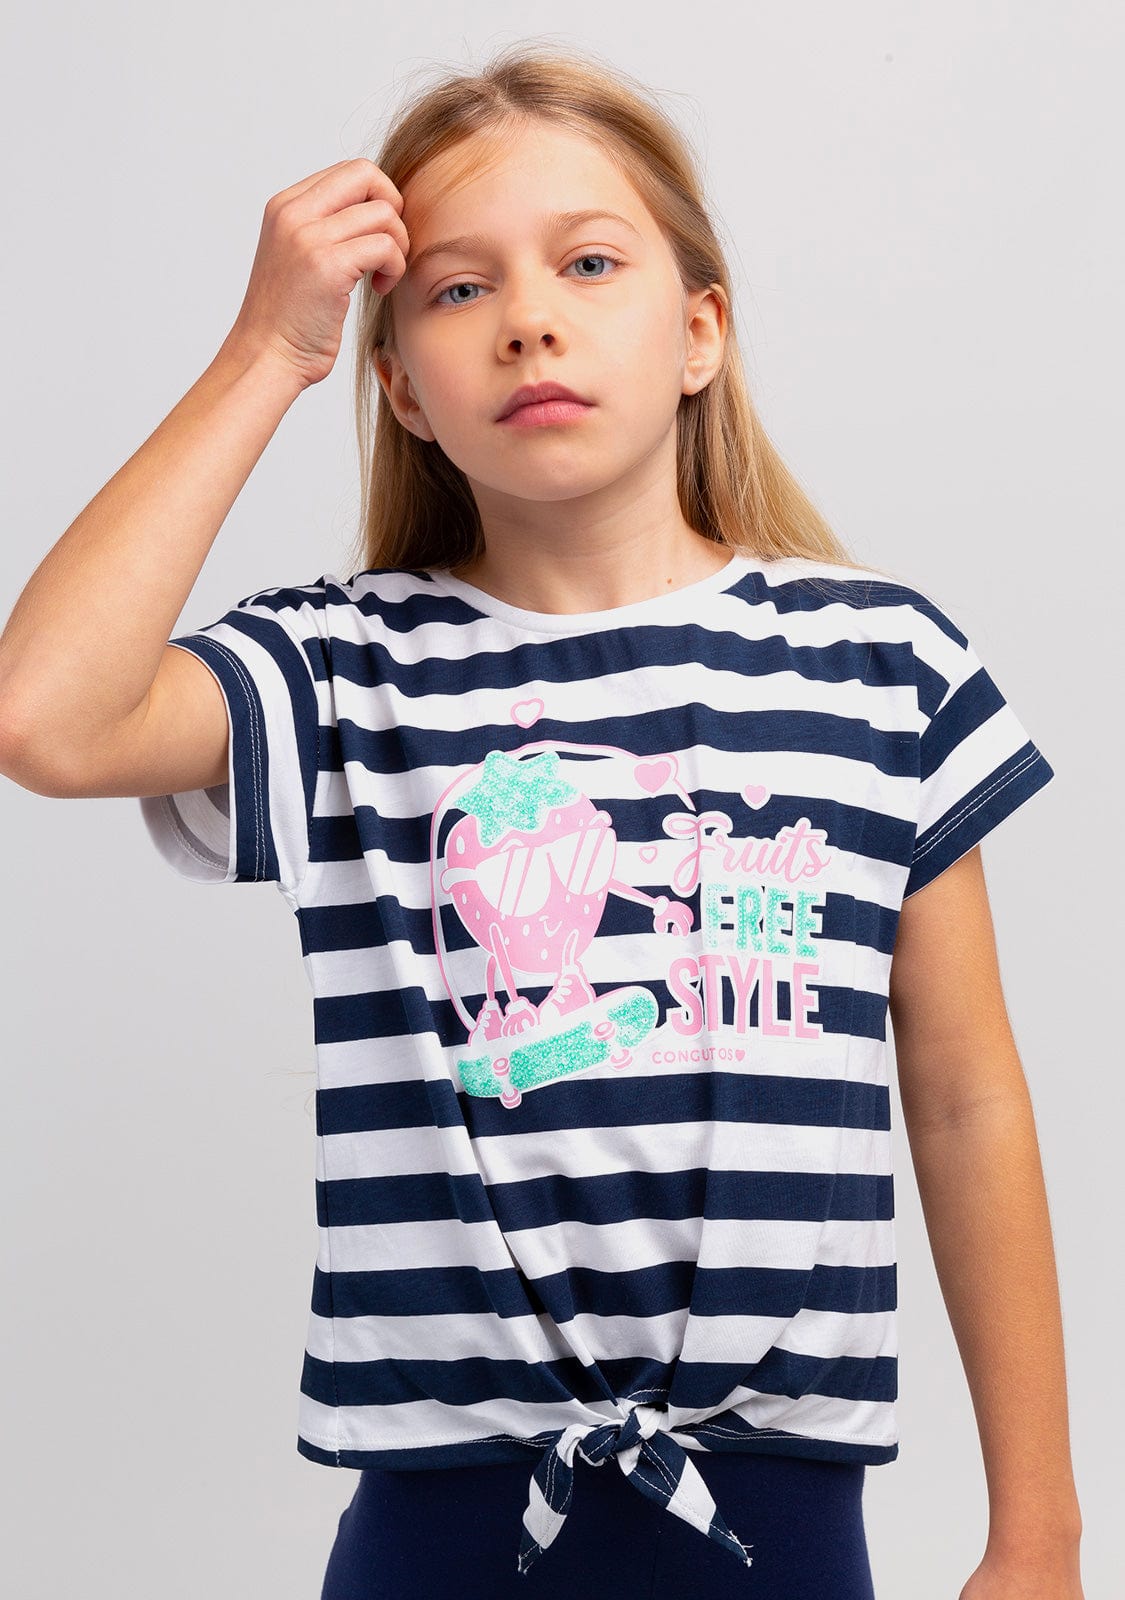 CONGUITOS TEXTIL Clothing Girl´s Stripes Knotted Strawberry Print T-shirt